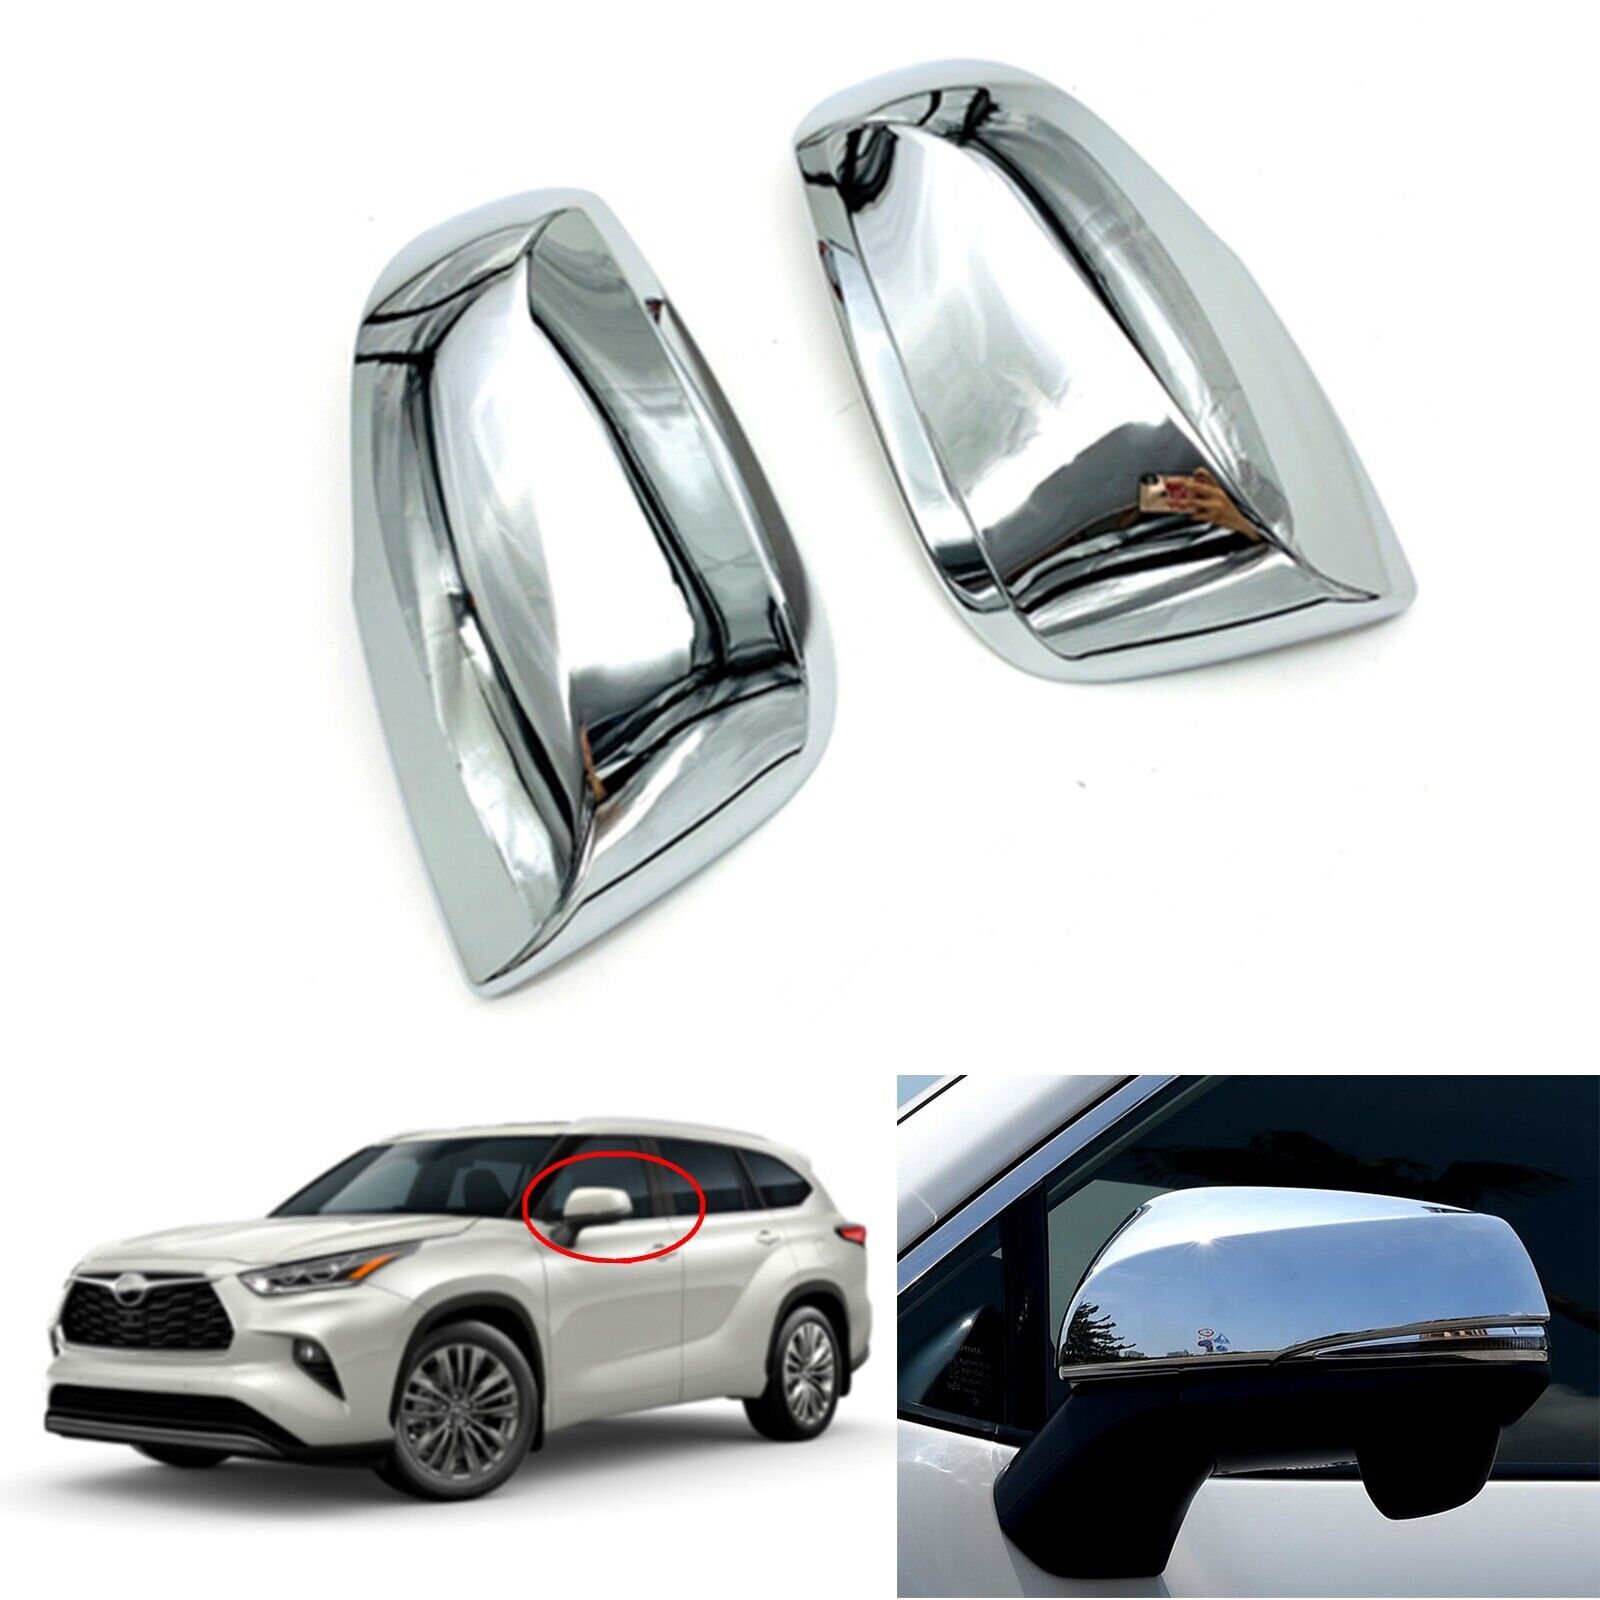 2x ABS Chrome Side Door Rear Mirrors Cover Trim For 2020 2021 Toyota Highlander